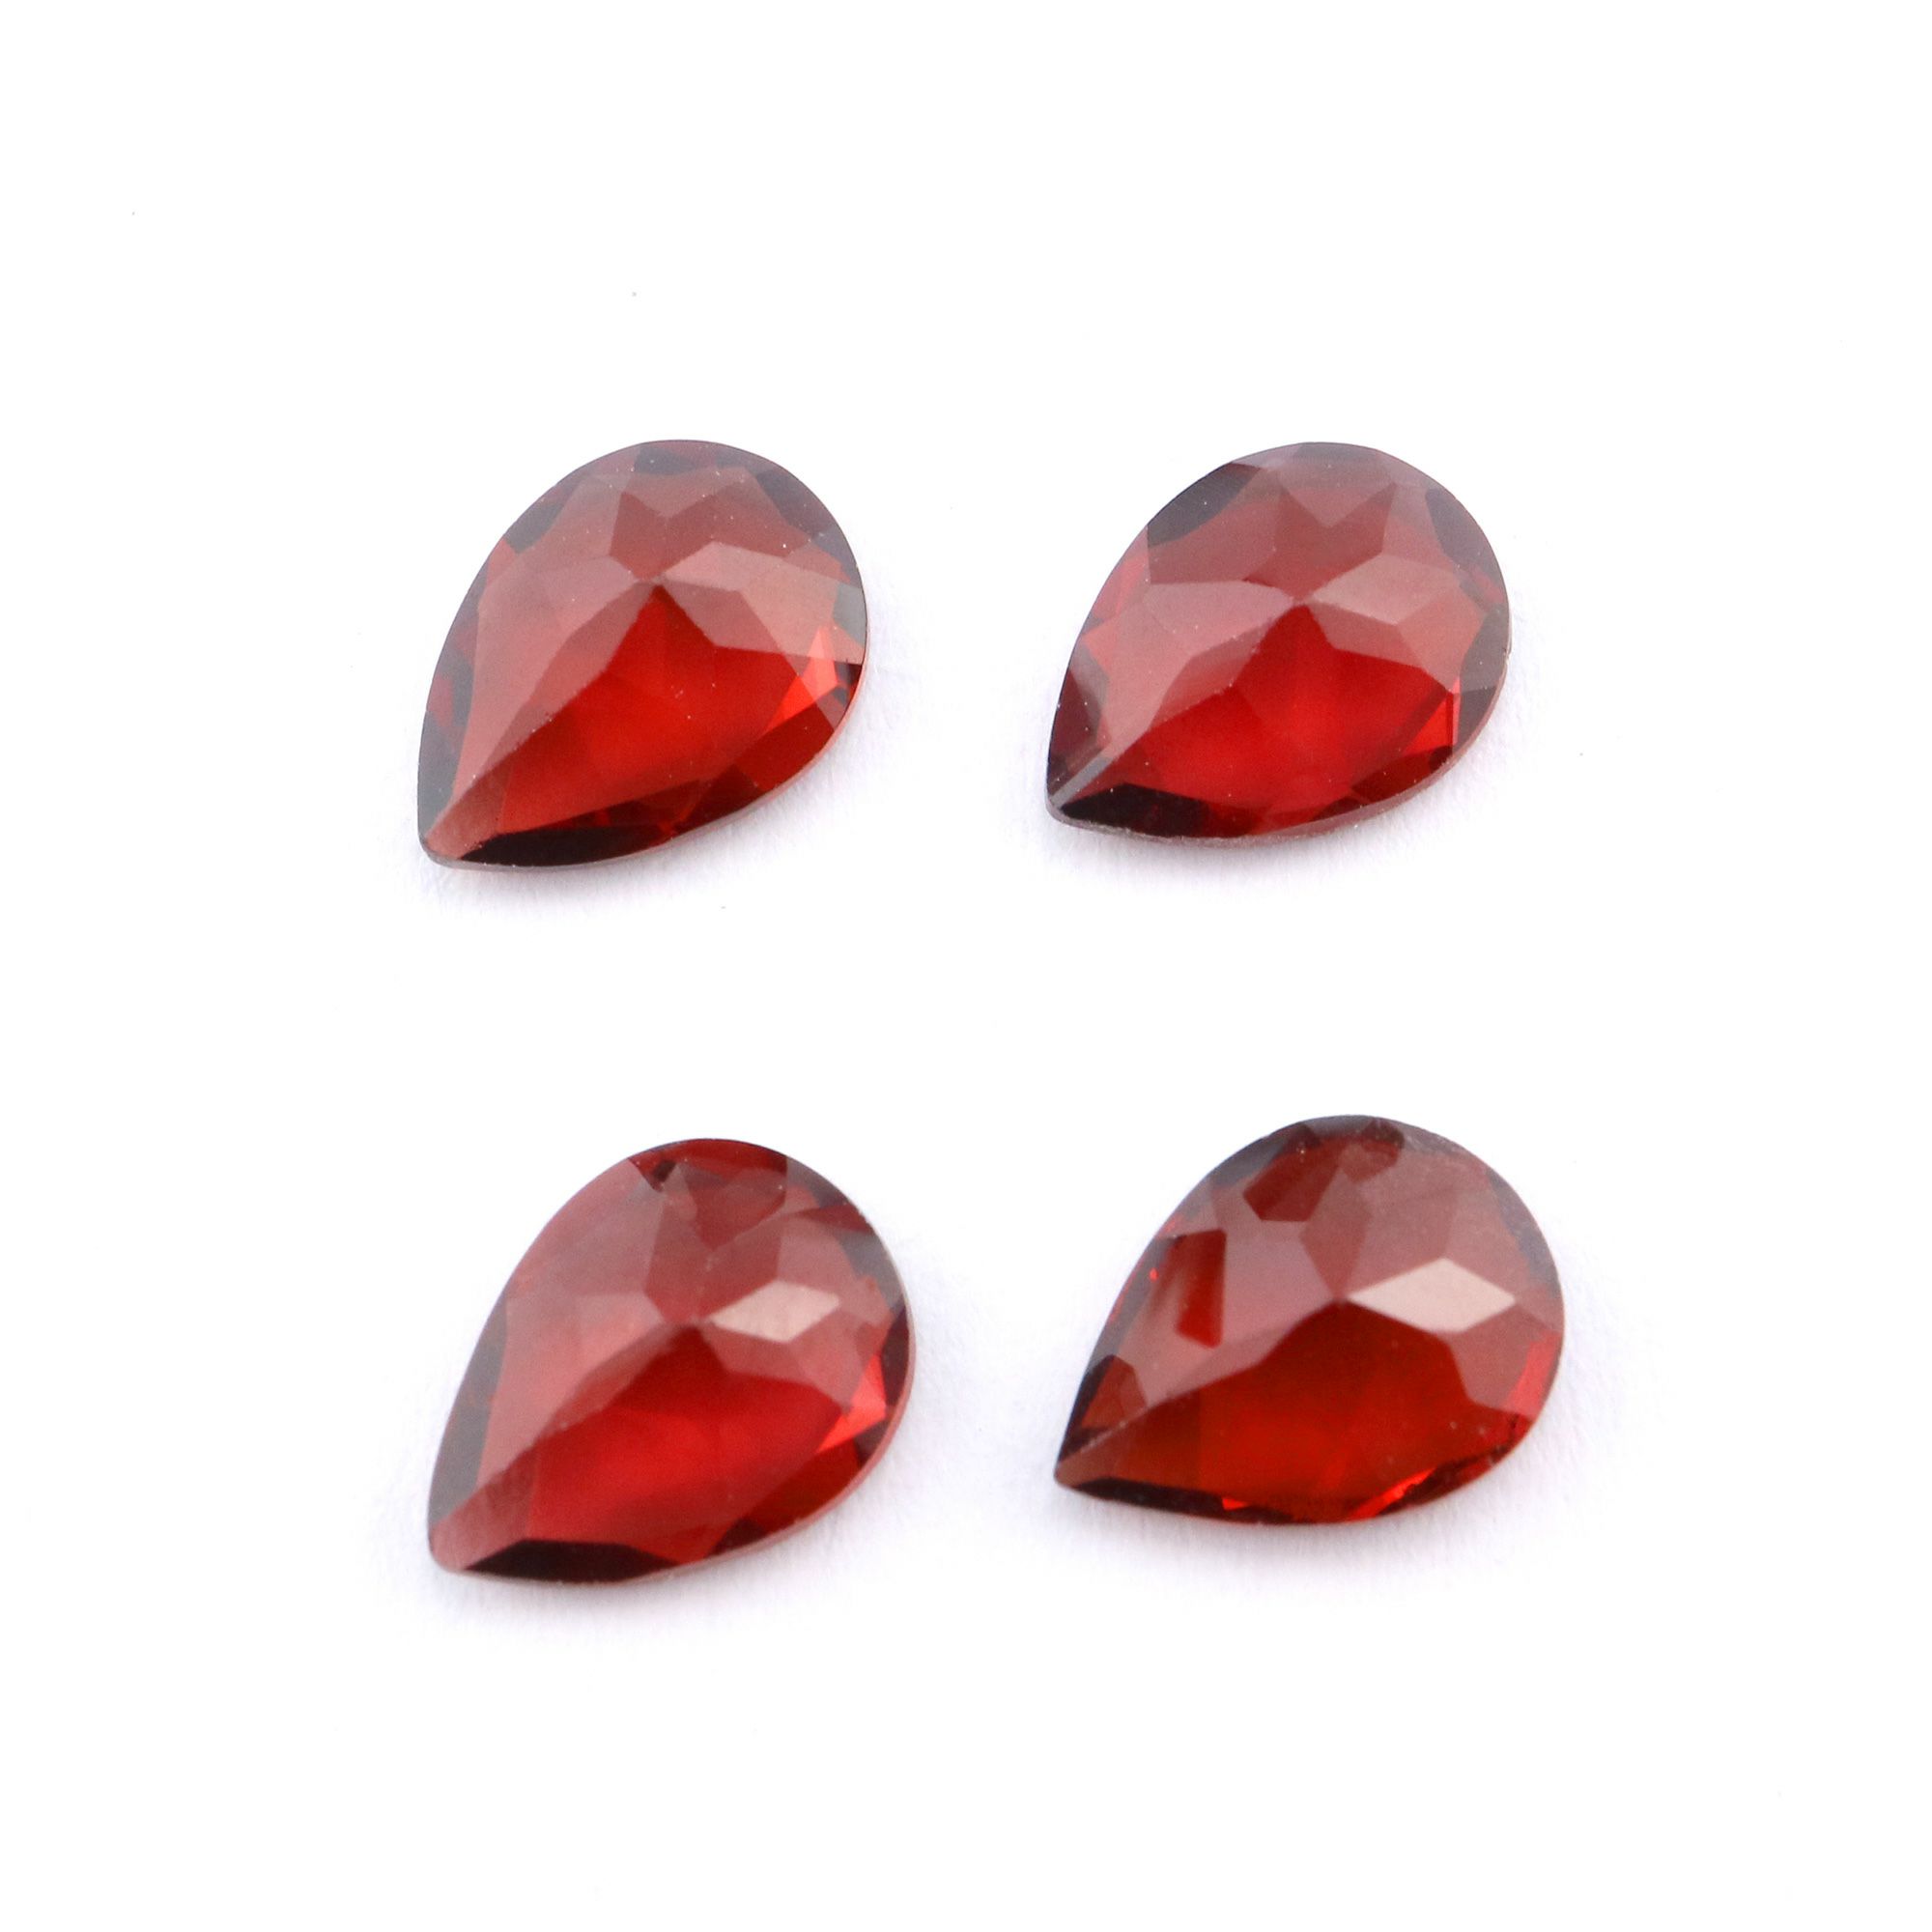 1Pcs Natural Red Garnet January Birthstone Pear Faceted Loose Gemstone Nature Semi Precious Stone DIY Jewelry Supplies 4150010 - Click Image to Close